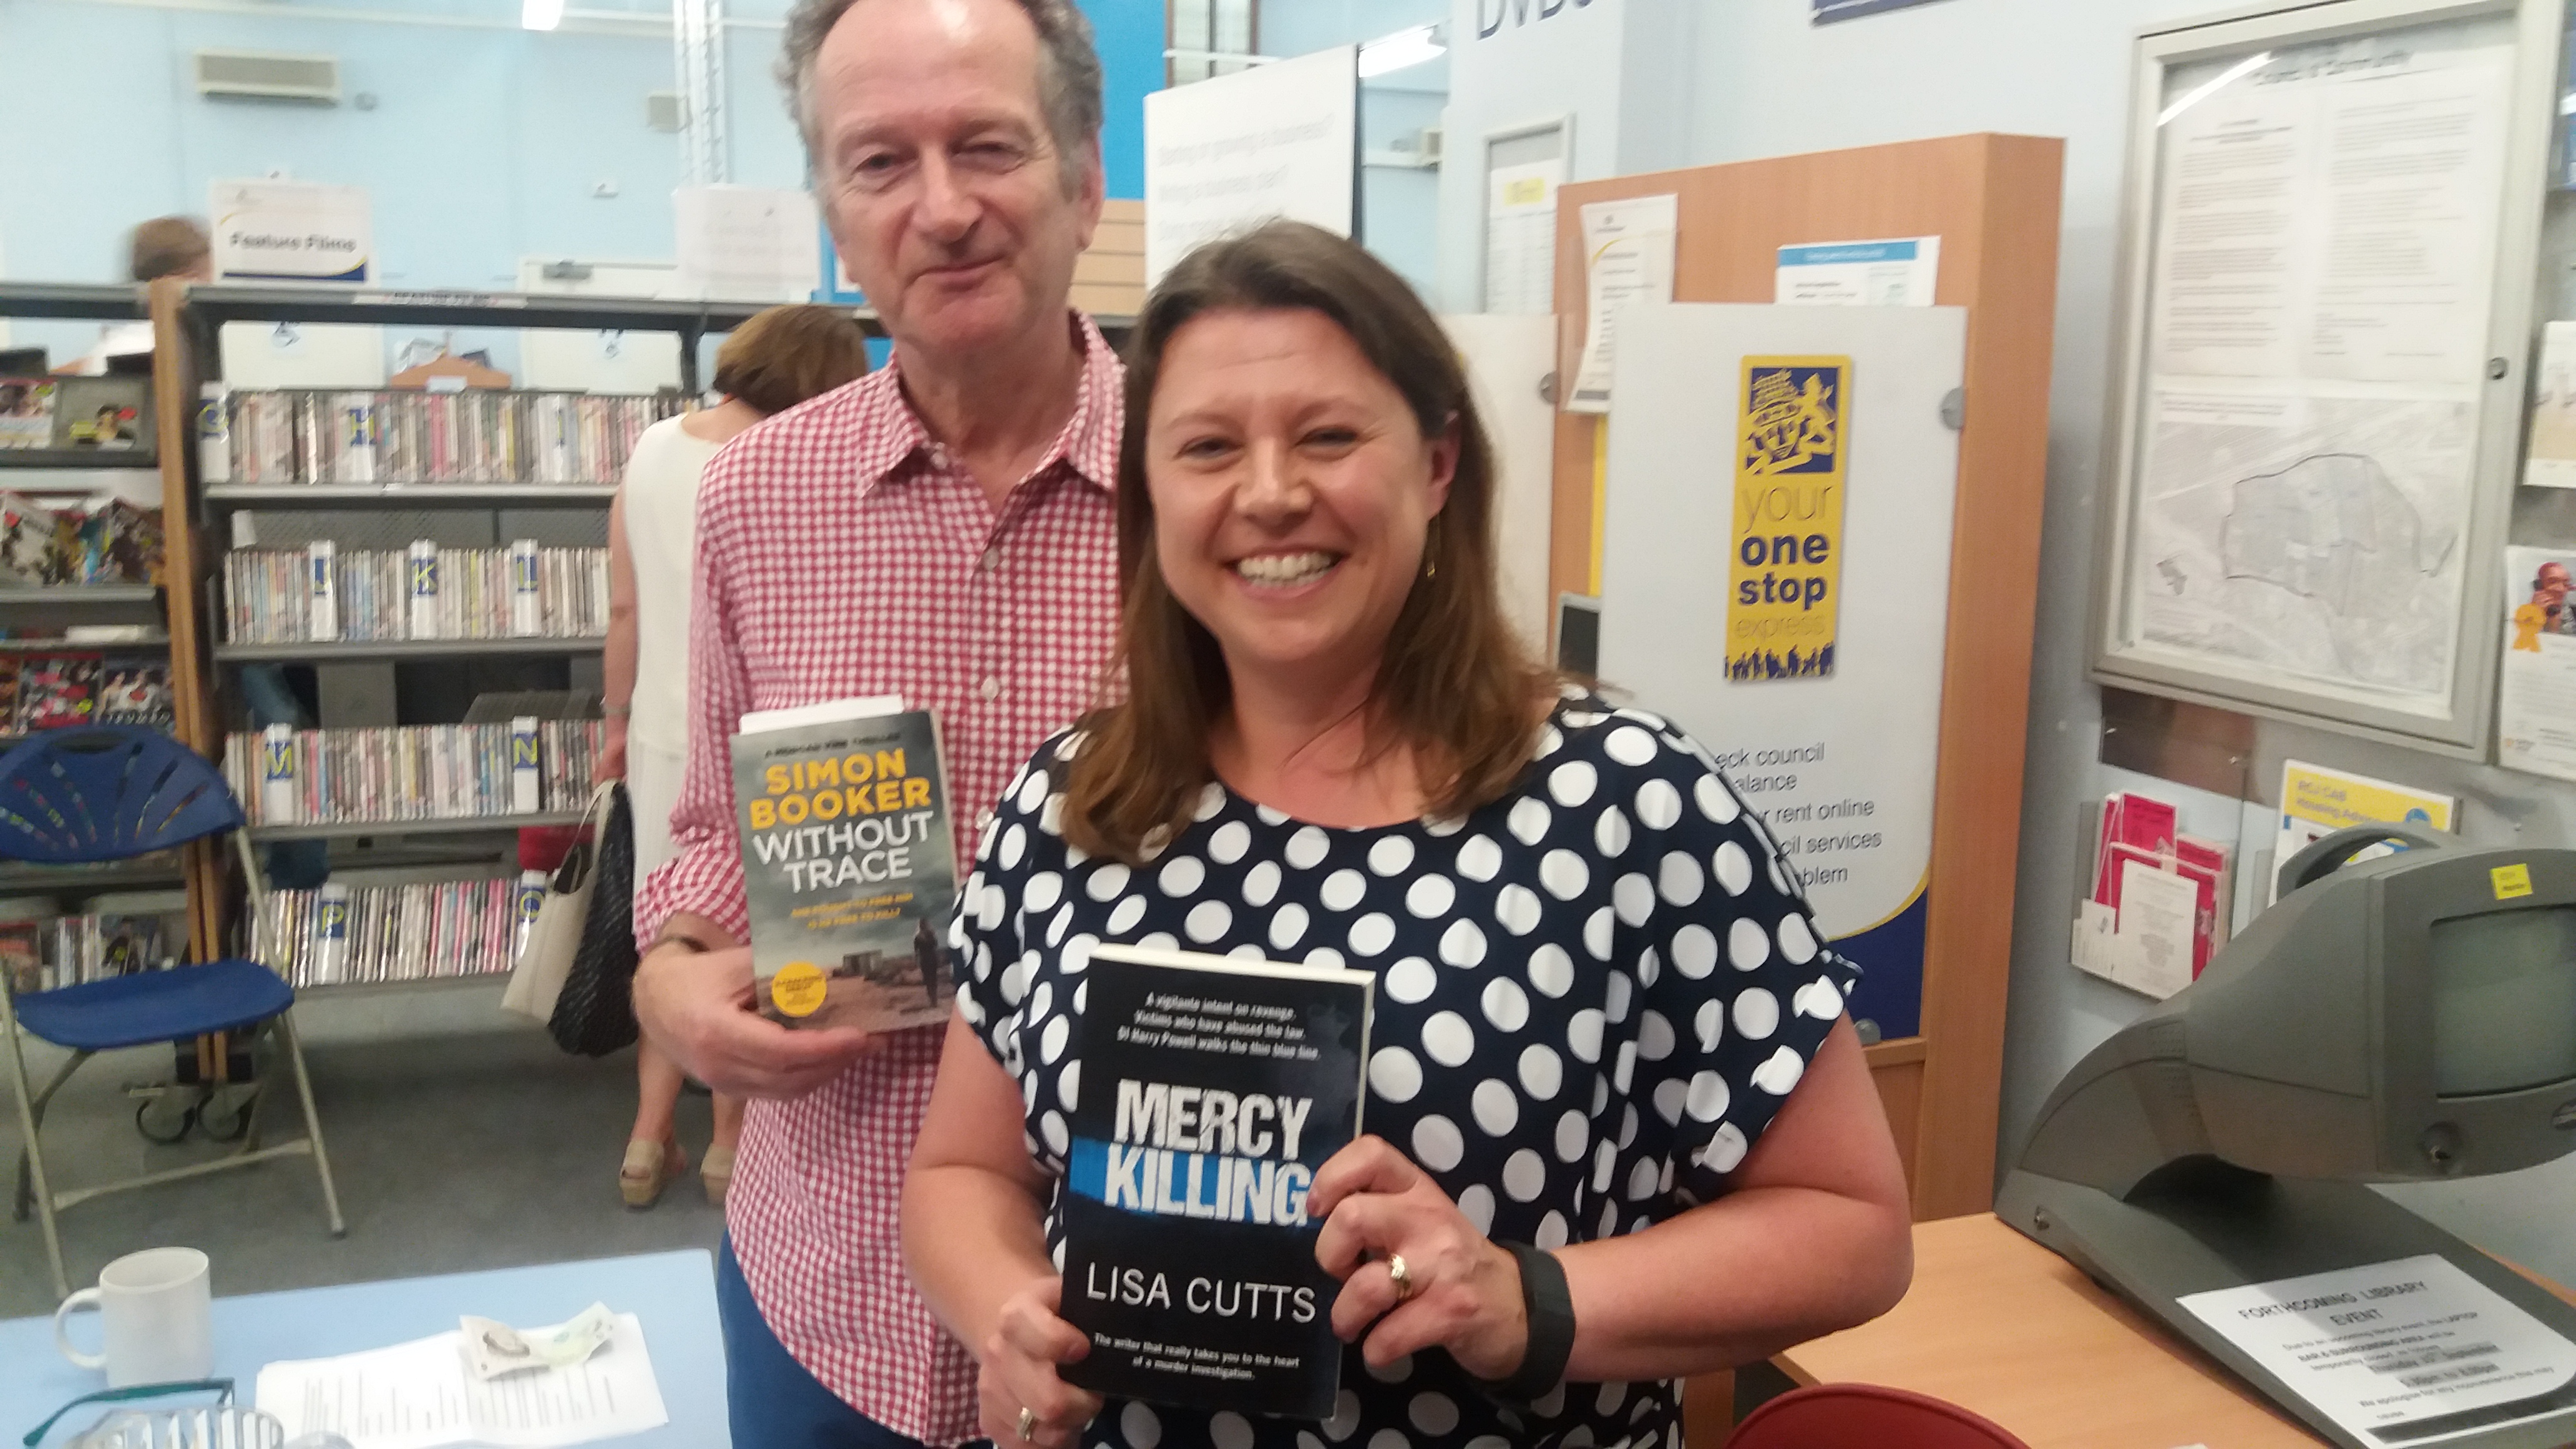 lisa-cutts-and-simon-booker-crime-authors-september-2016